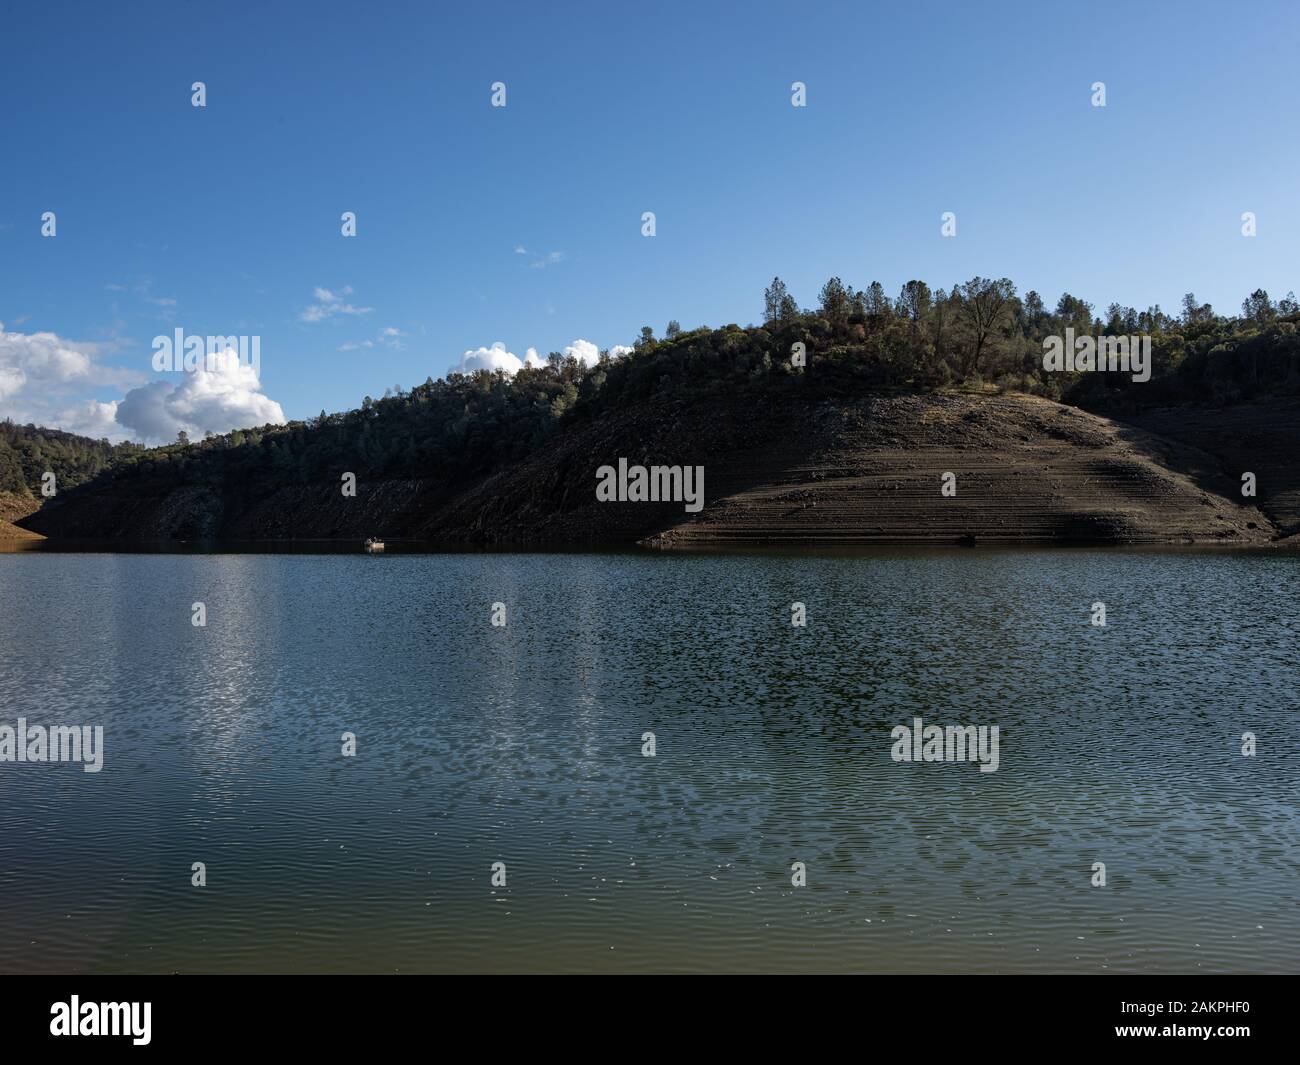 Theres a boat peaking out of the shadow of the hill on the lake. Stock Photo